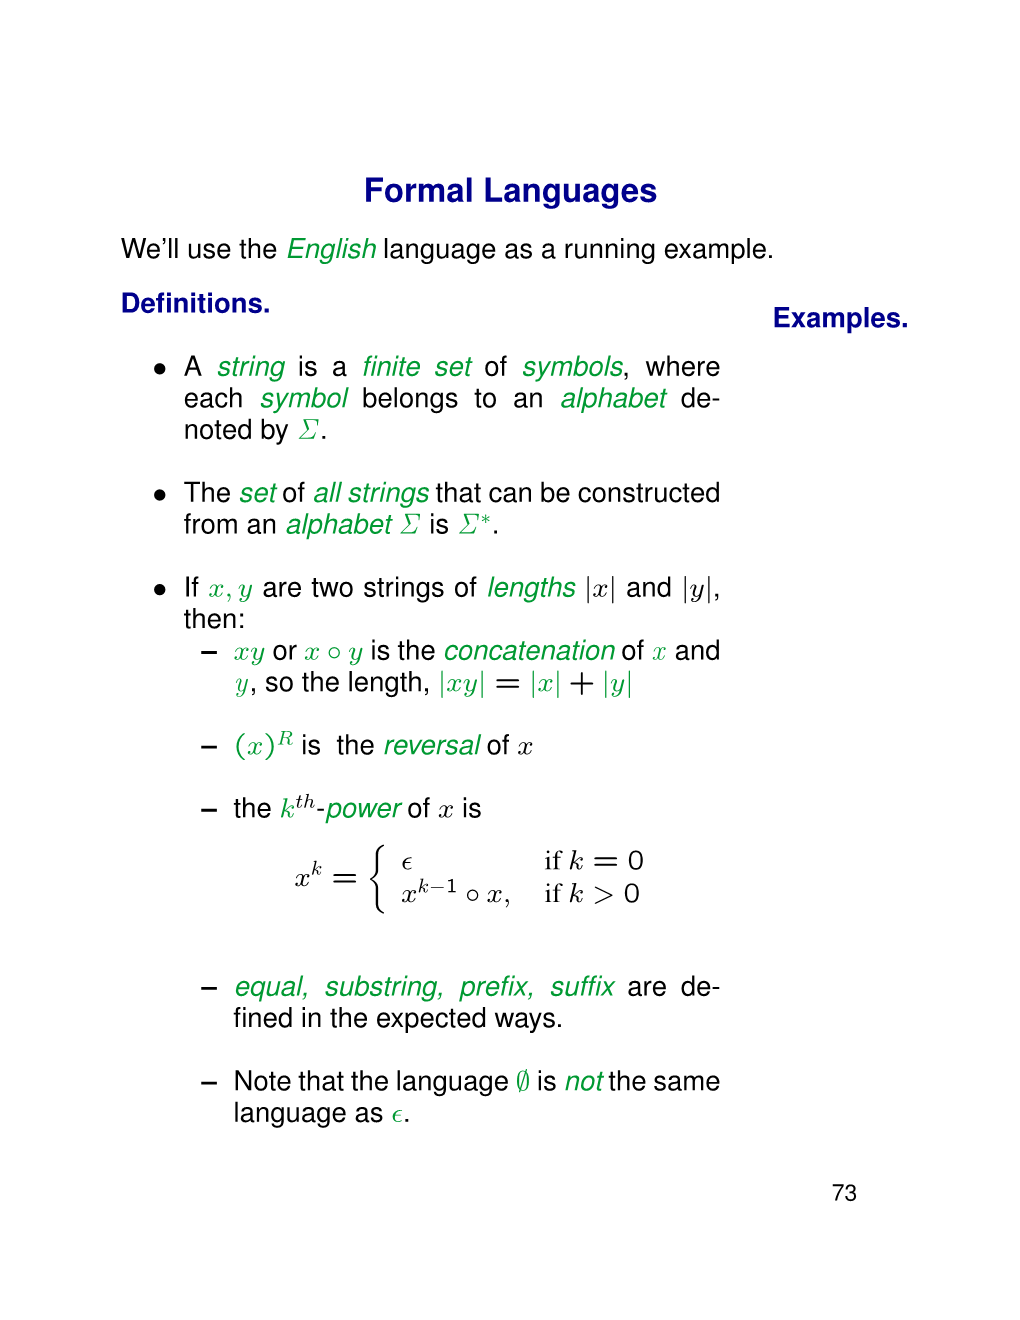 Formal Languages We’Ll Use the English Language As a Running Example